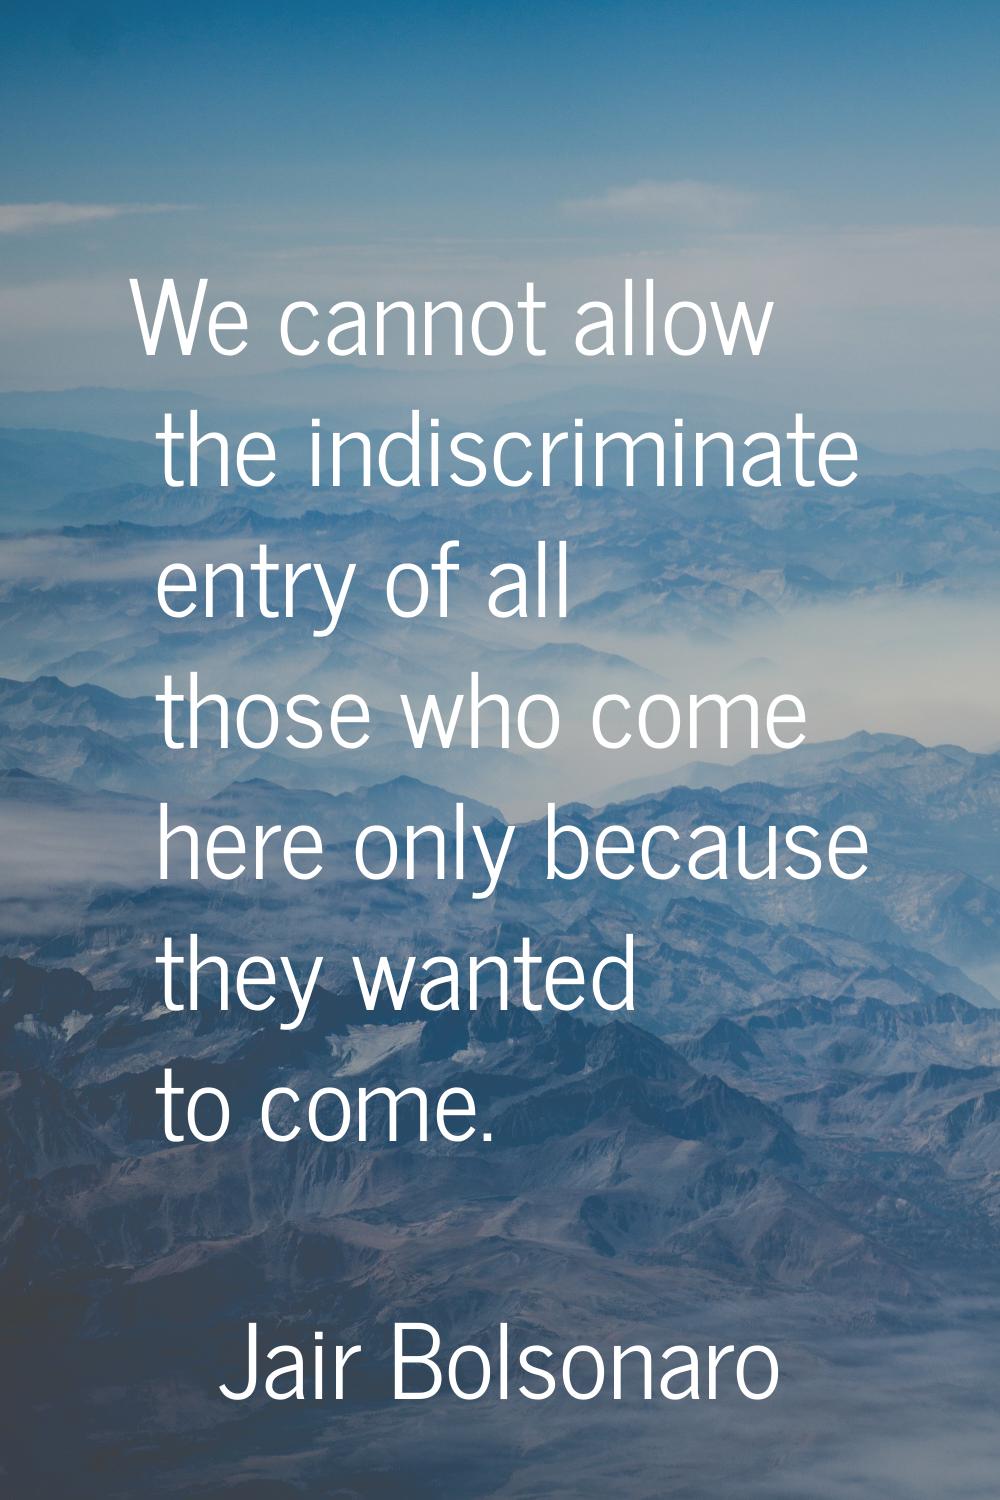 We cannot allow the indiscriminate entry of all those who come here only because they wanted to com